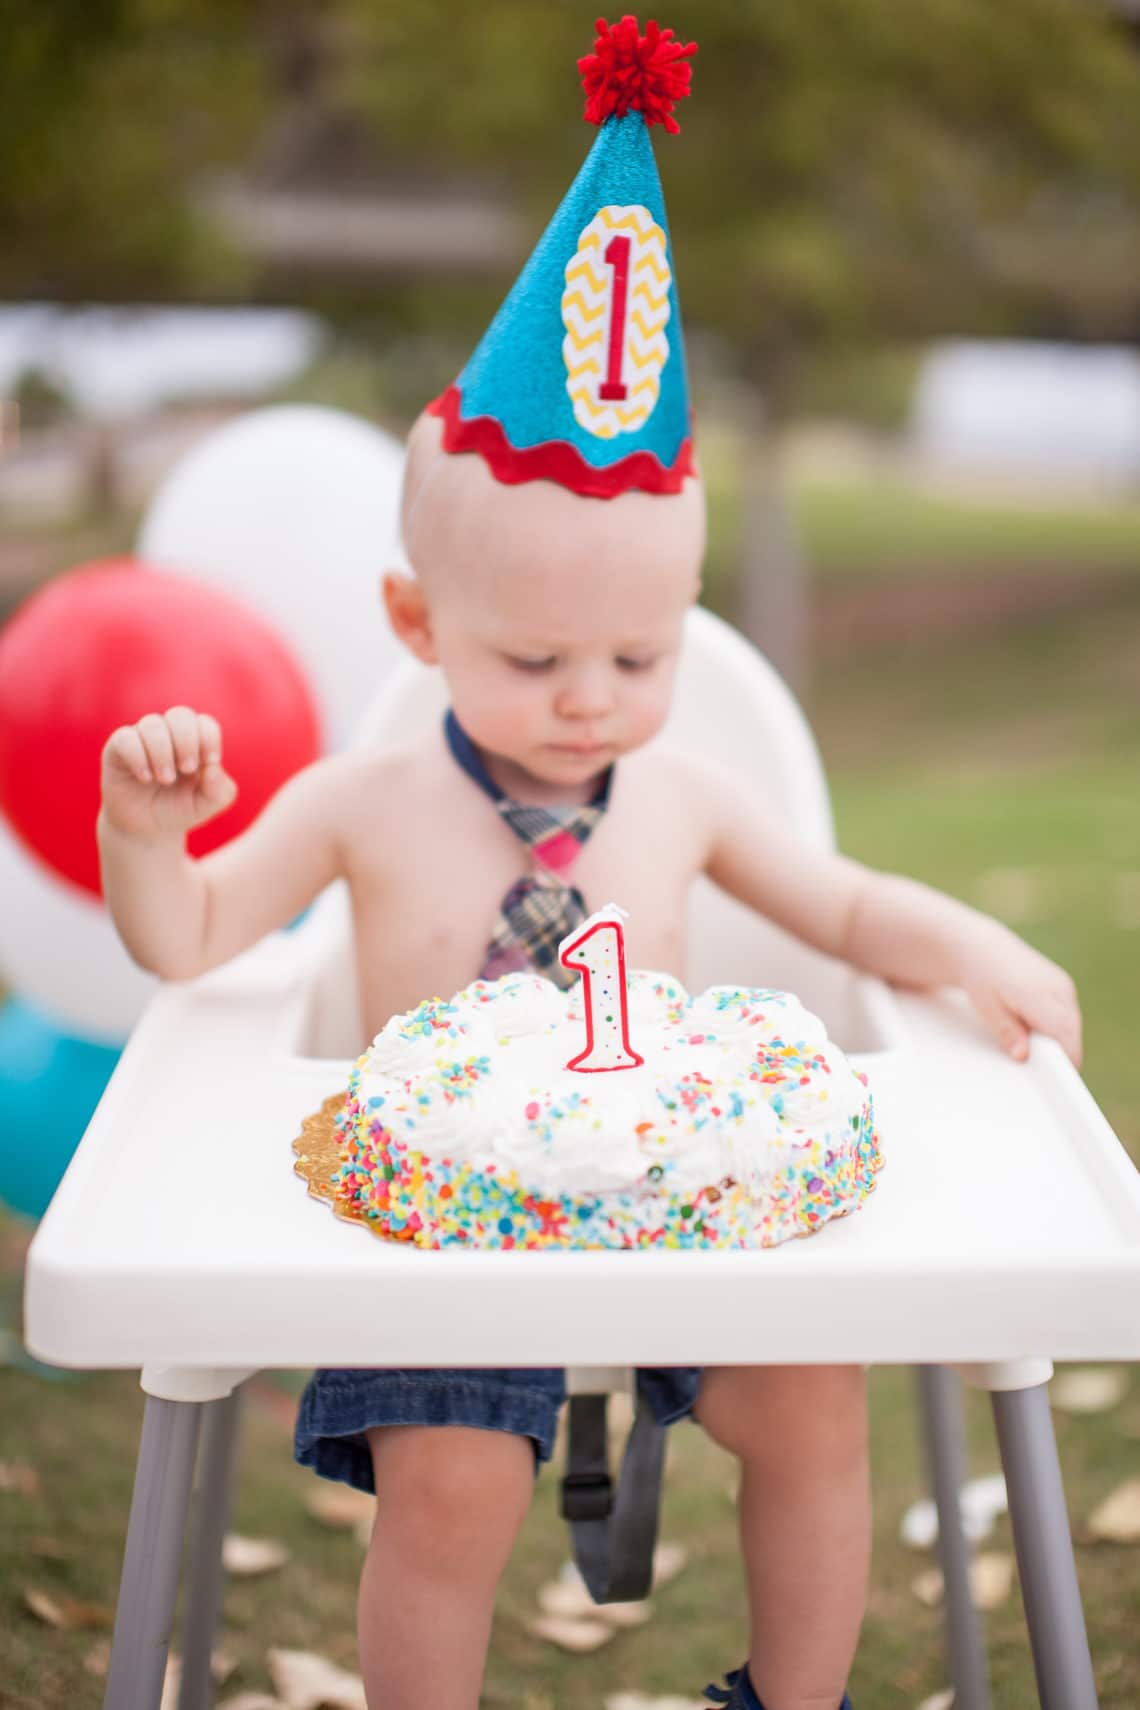 Baby First Birthday: 10 Reasons to Have a 1st Birthday Party